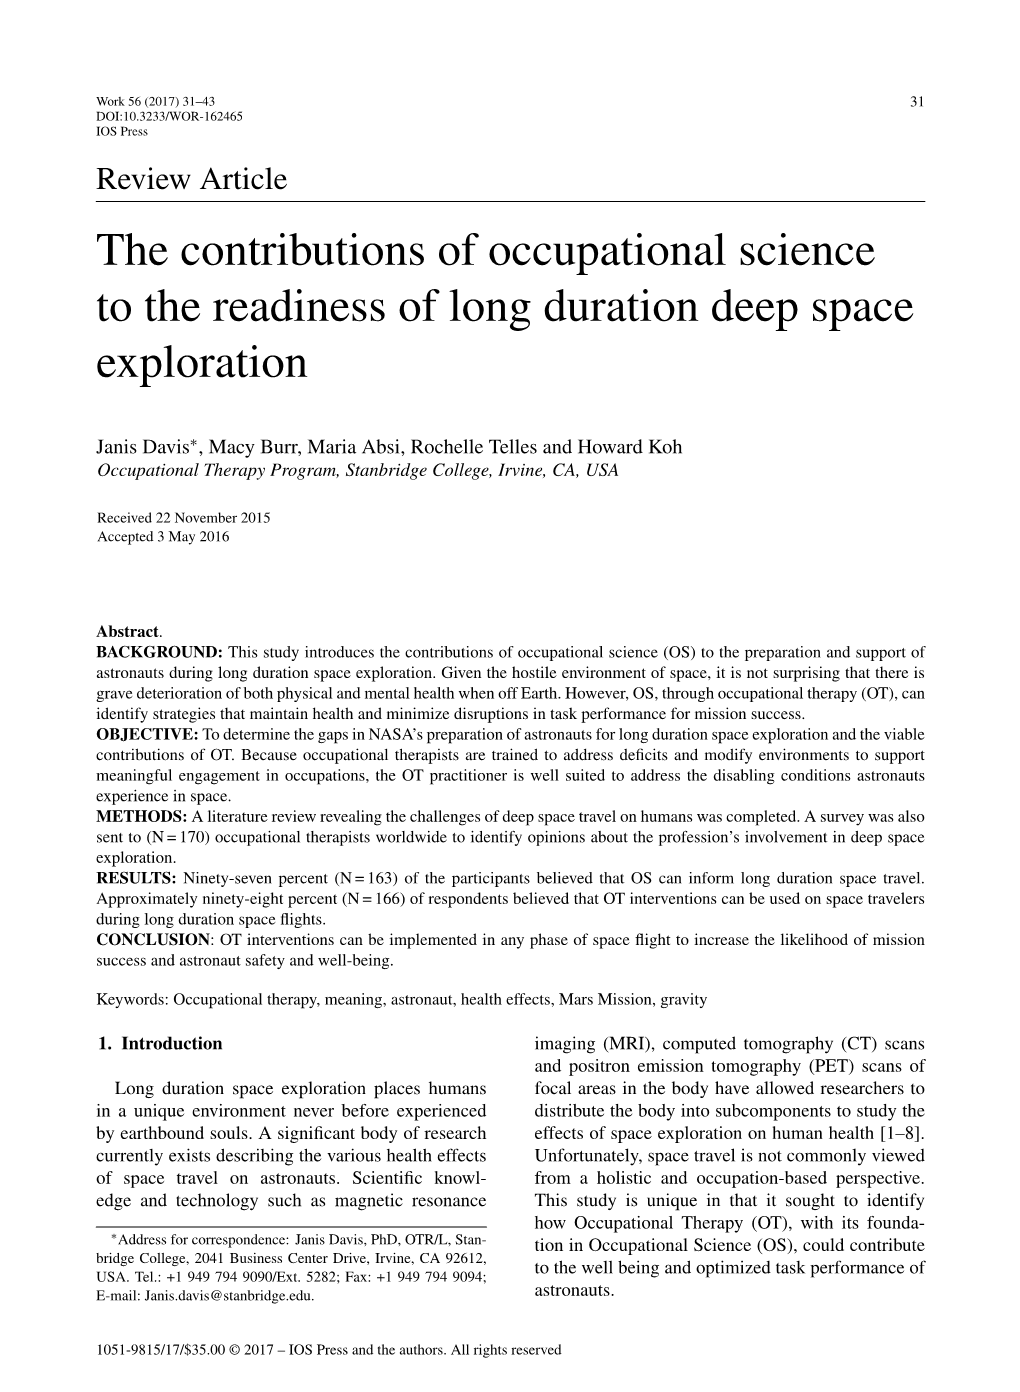 The Contributions of Occupational Science to the Readiness of Long Duration Deep Space Exploration